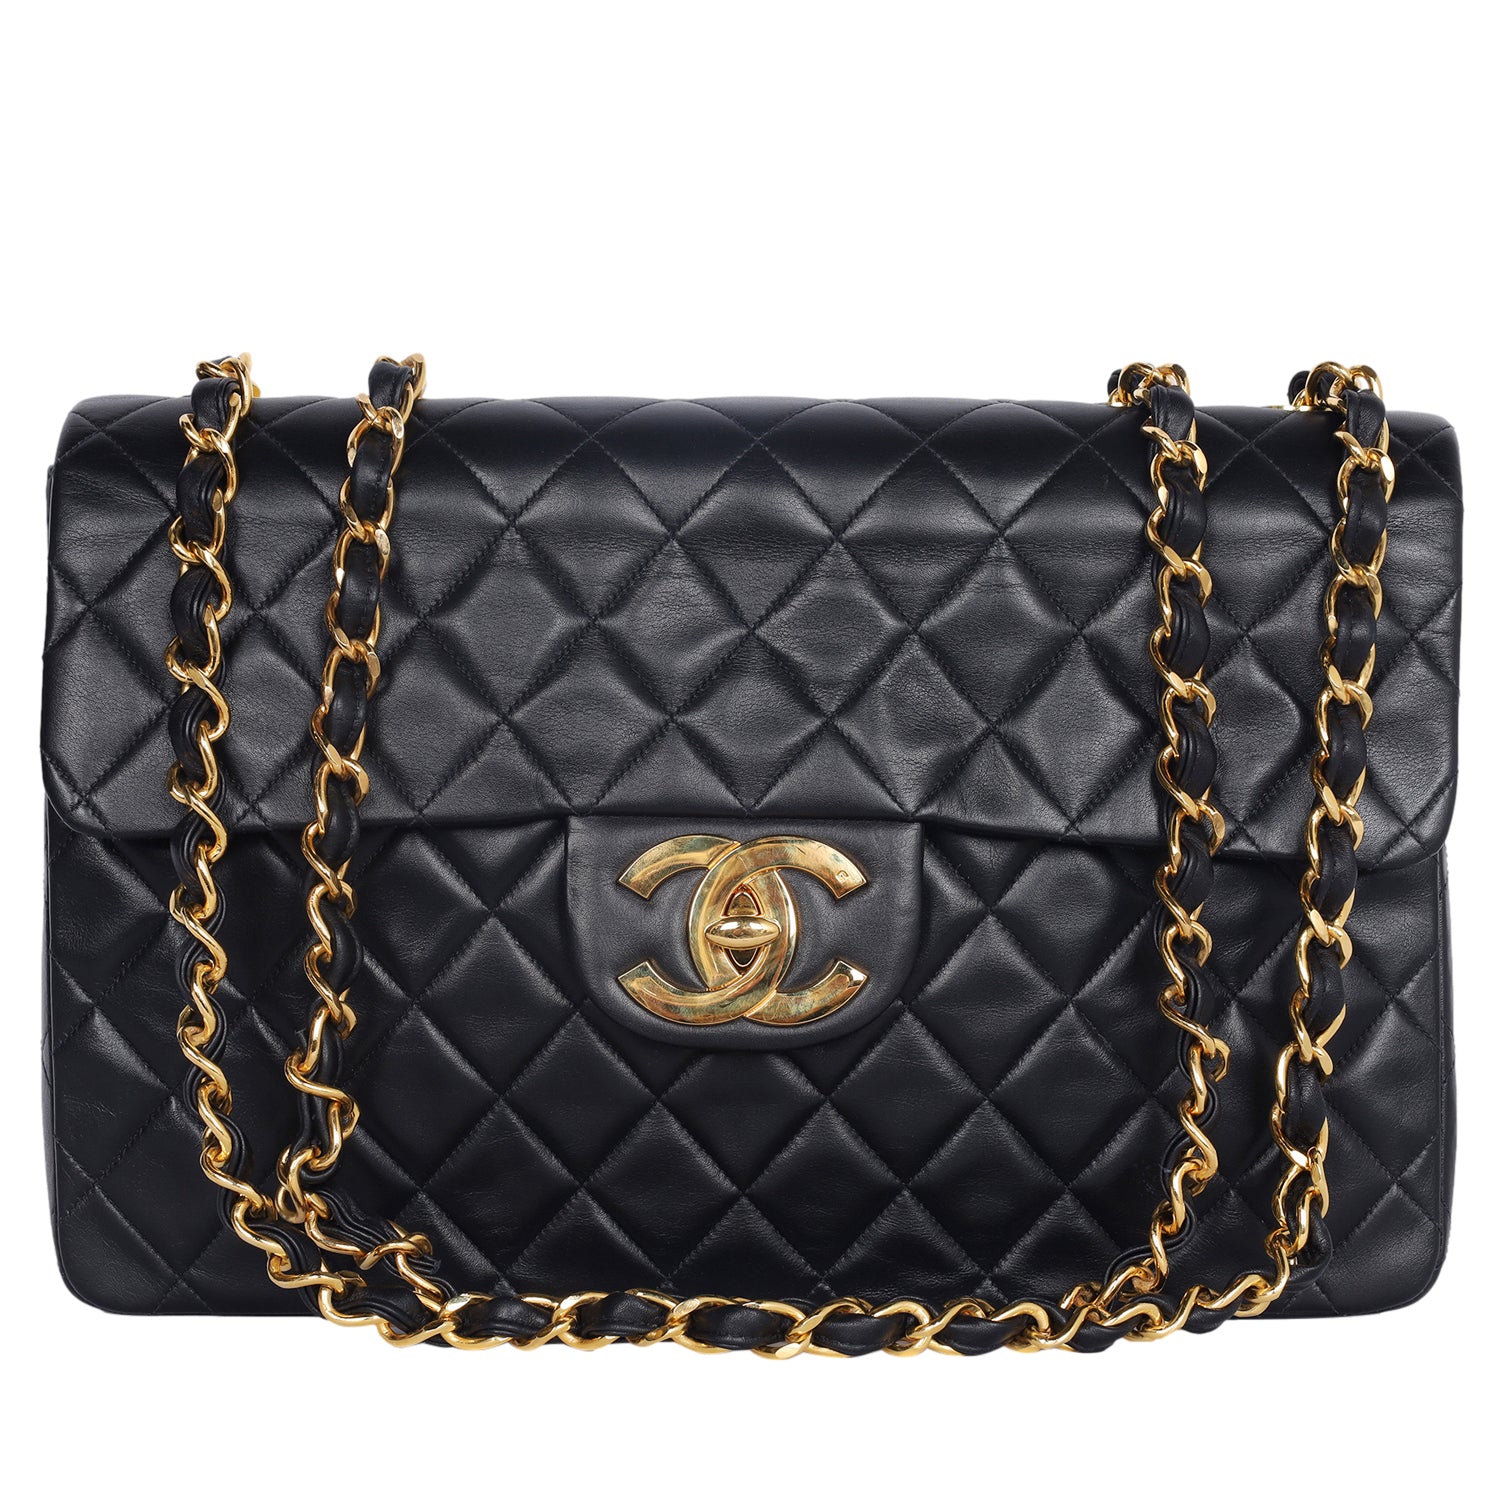 Buy Authentic Chanel Classic Flap Bags